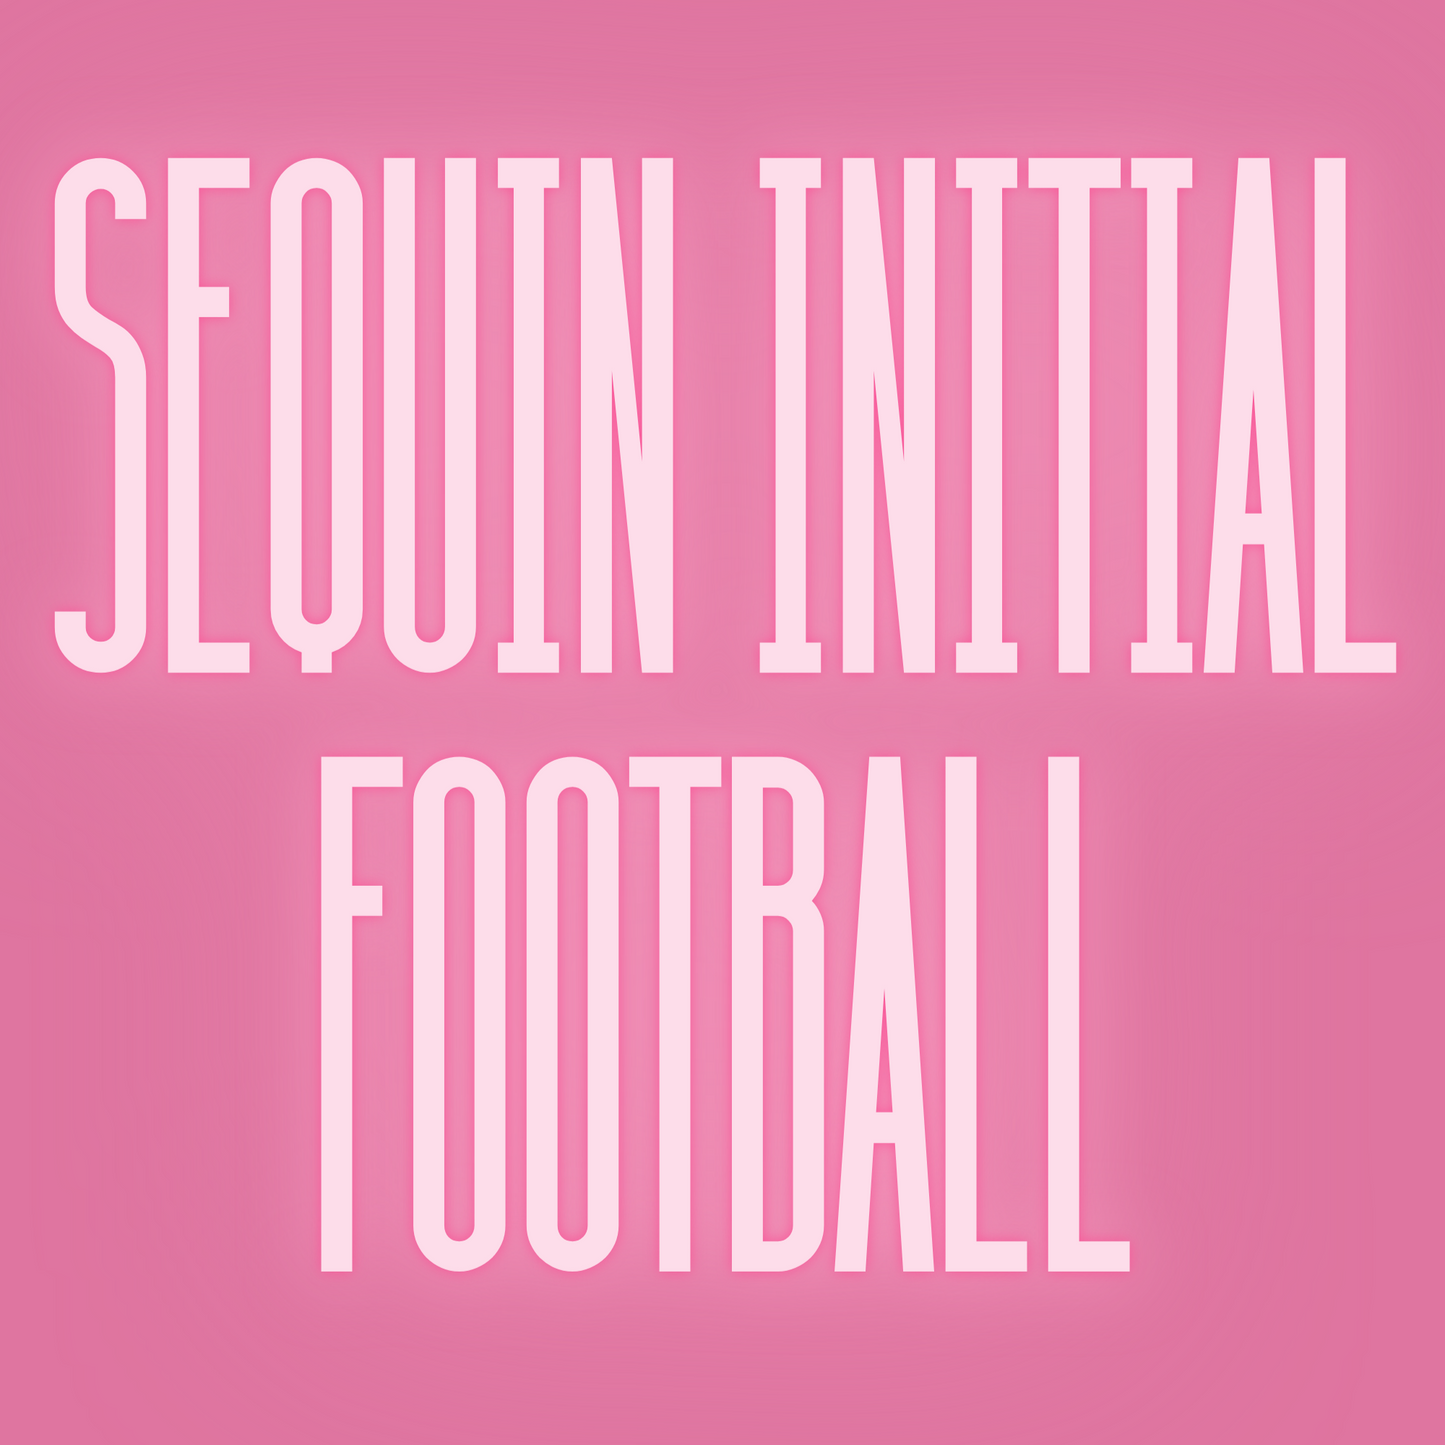 Sequin Initial Football - WS